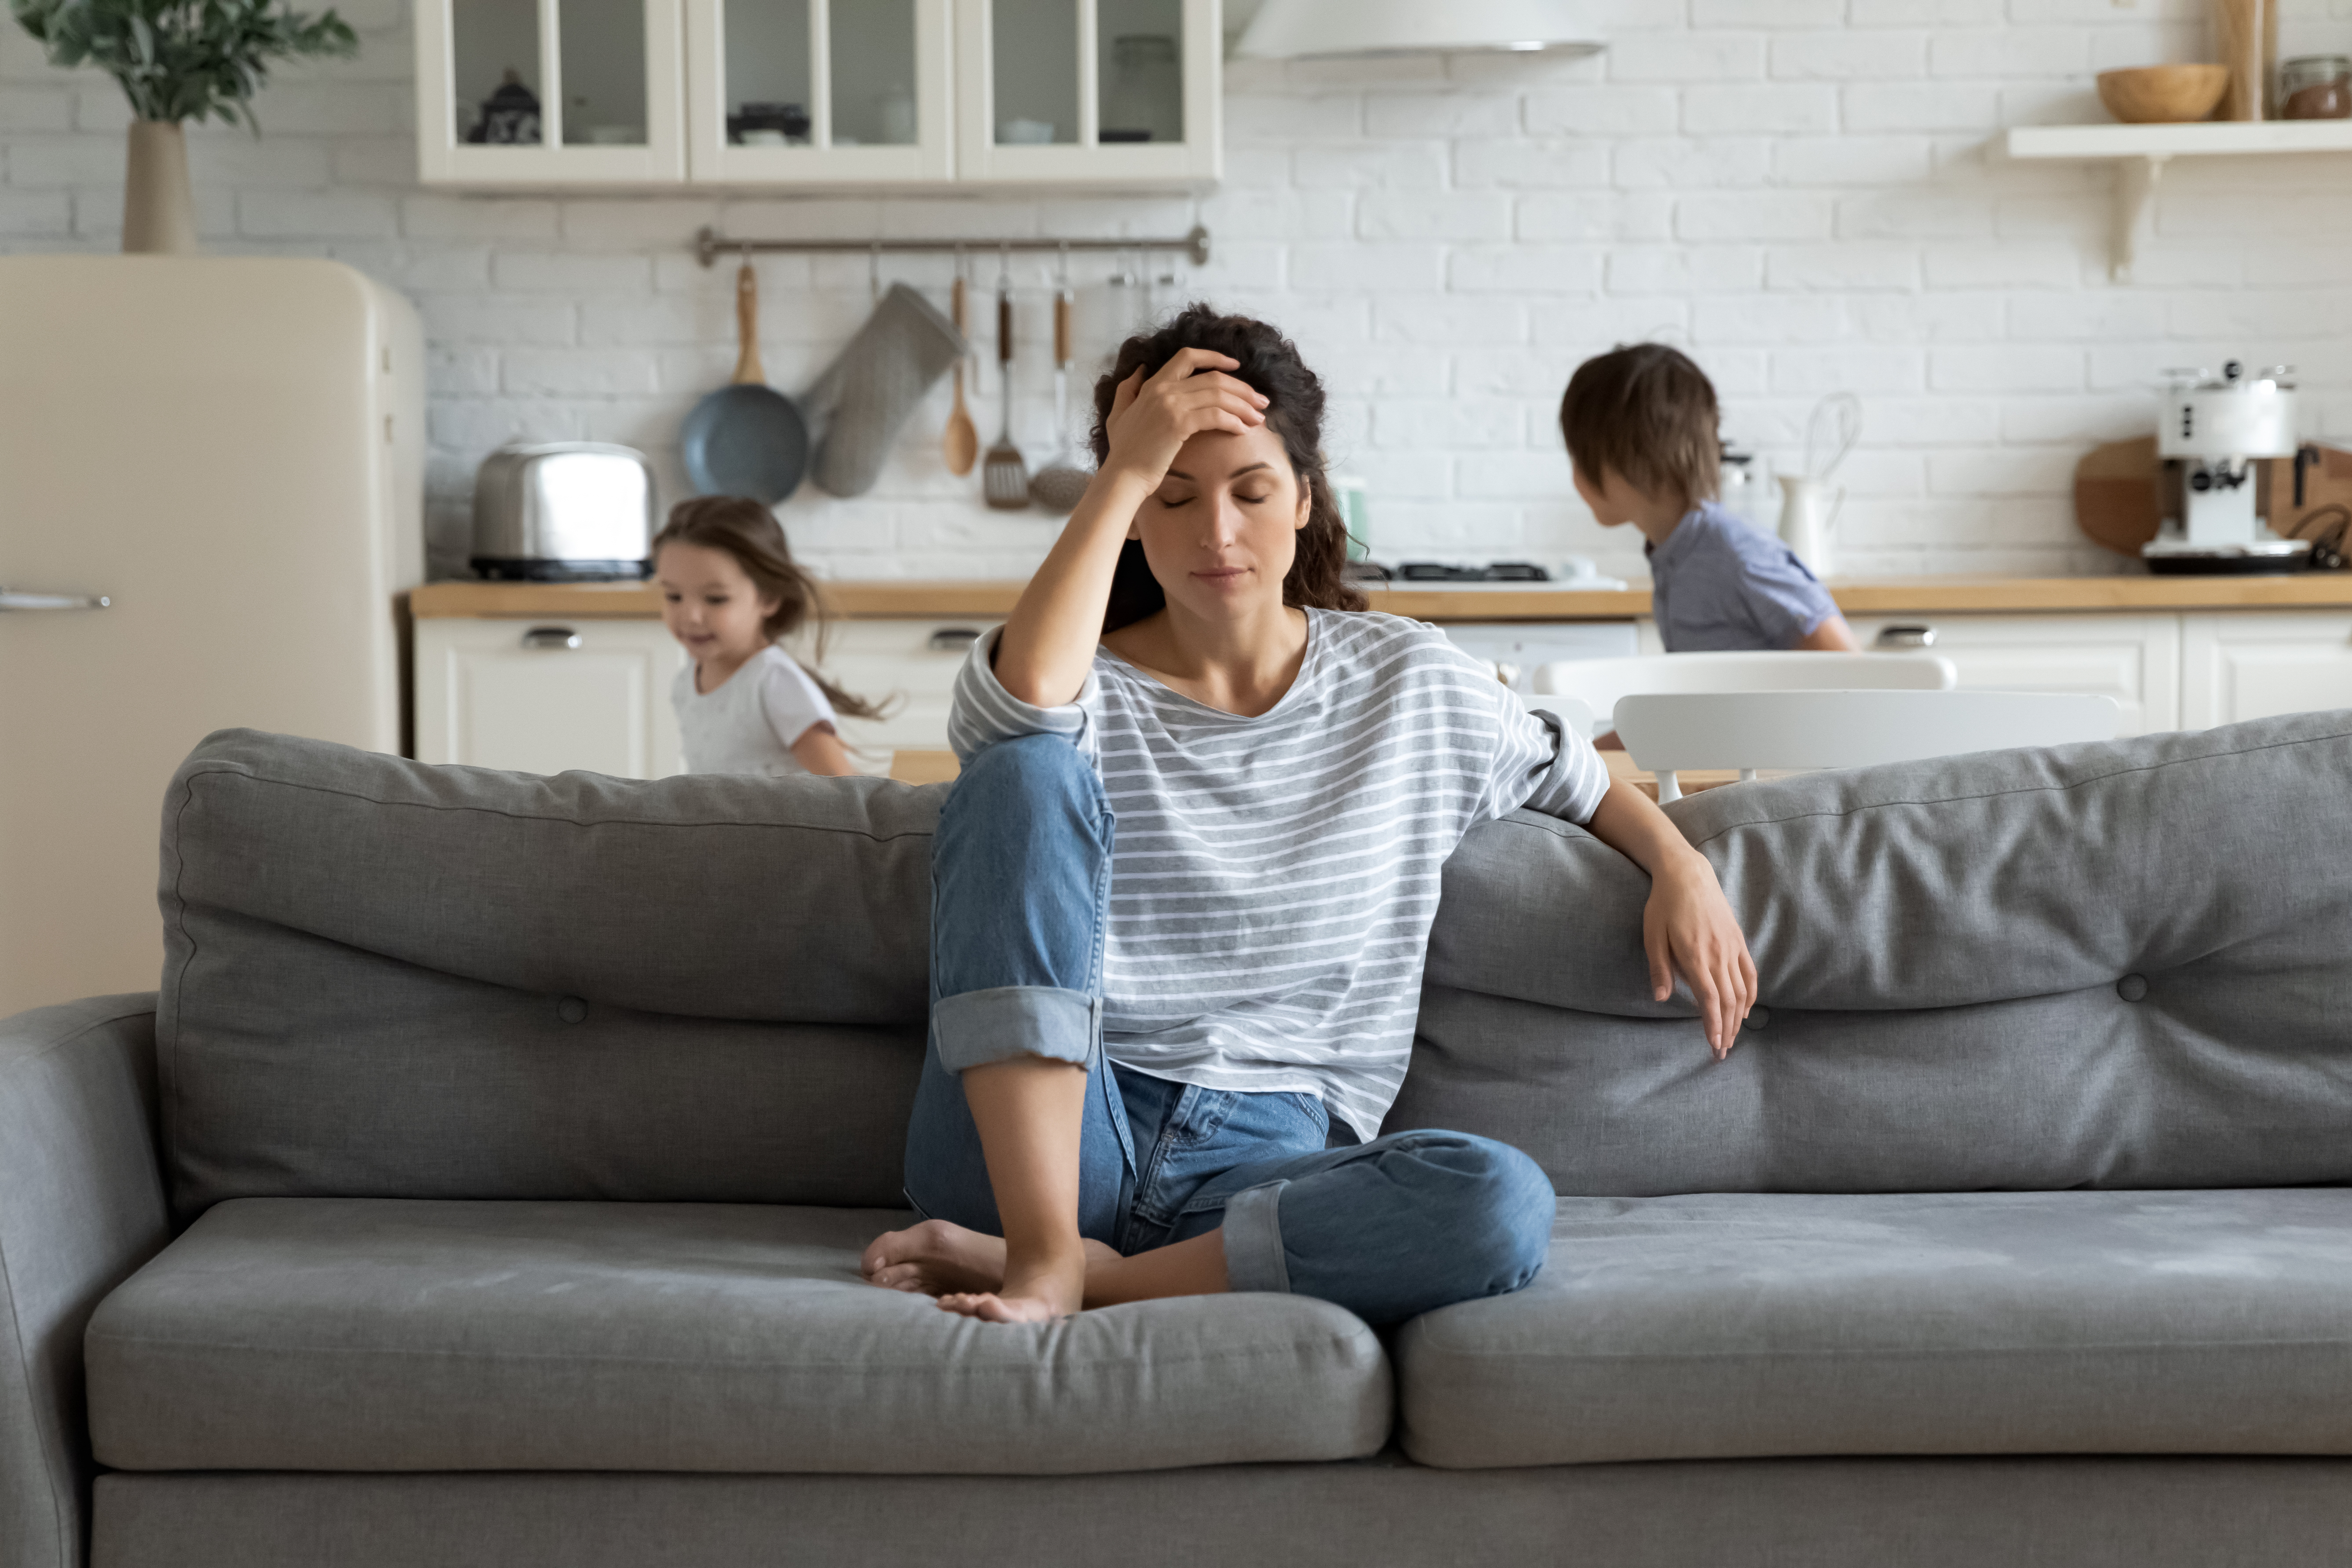 A woman sitting on the couch and looking problematic as two kids run around behind her | Source: Shutterstock